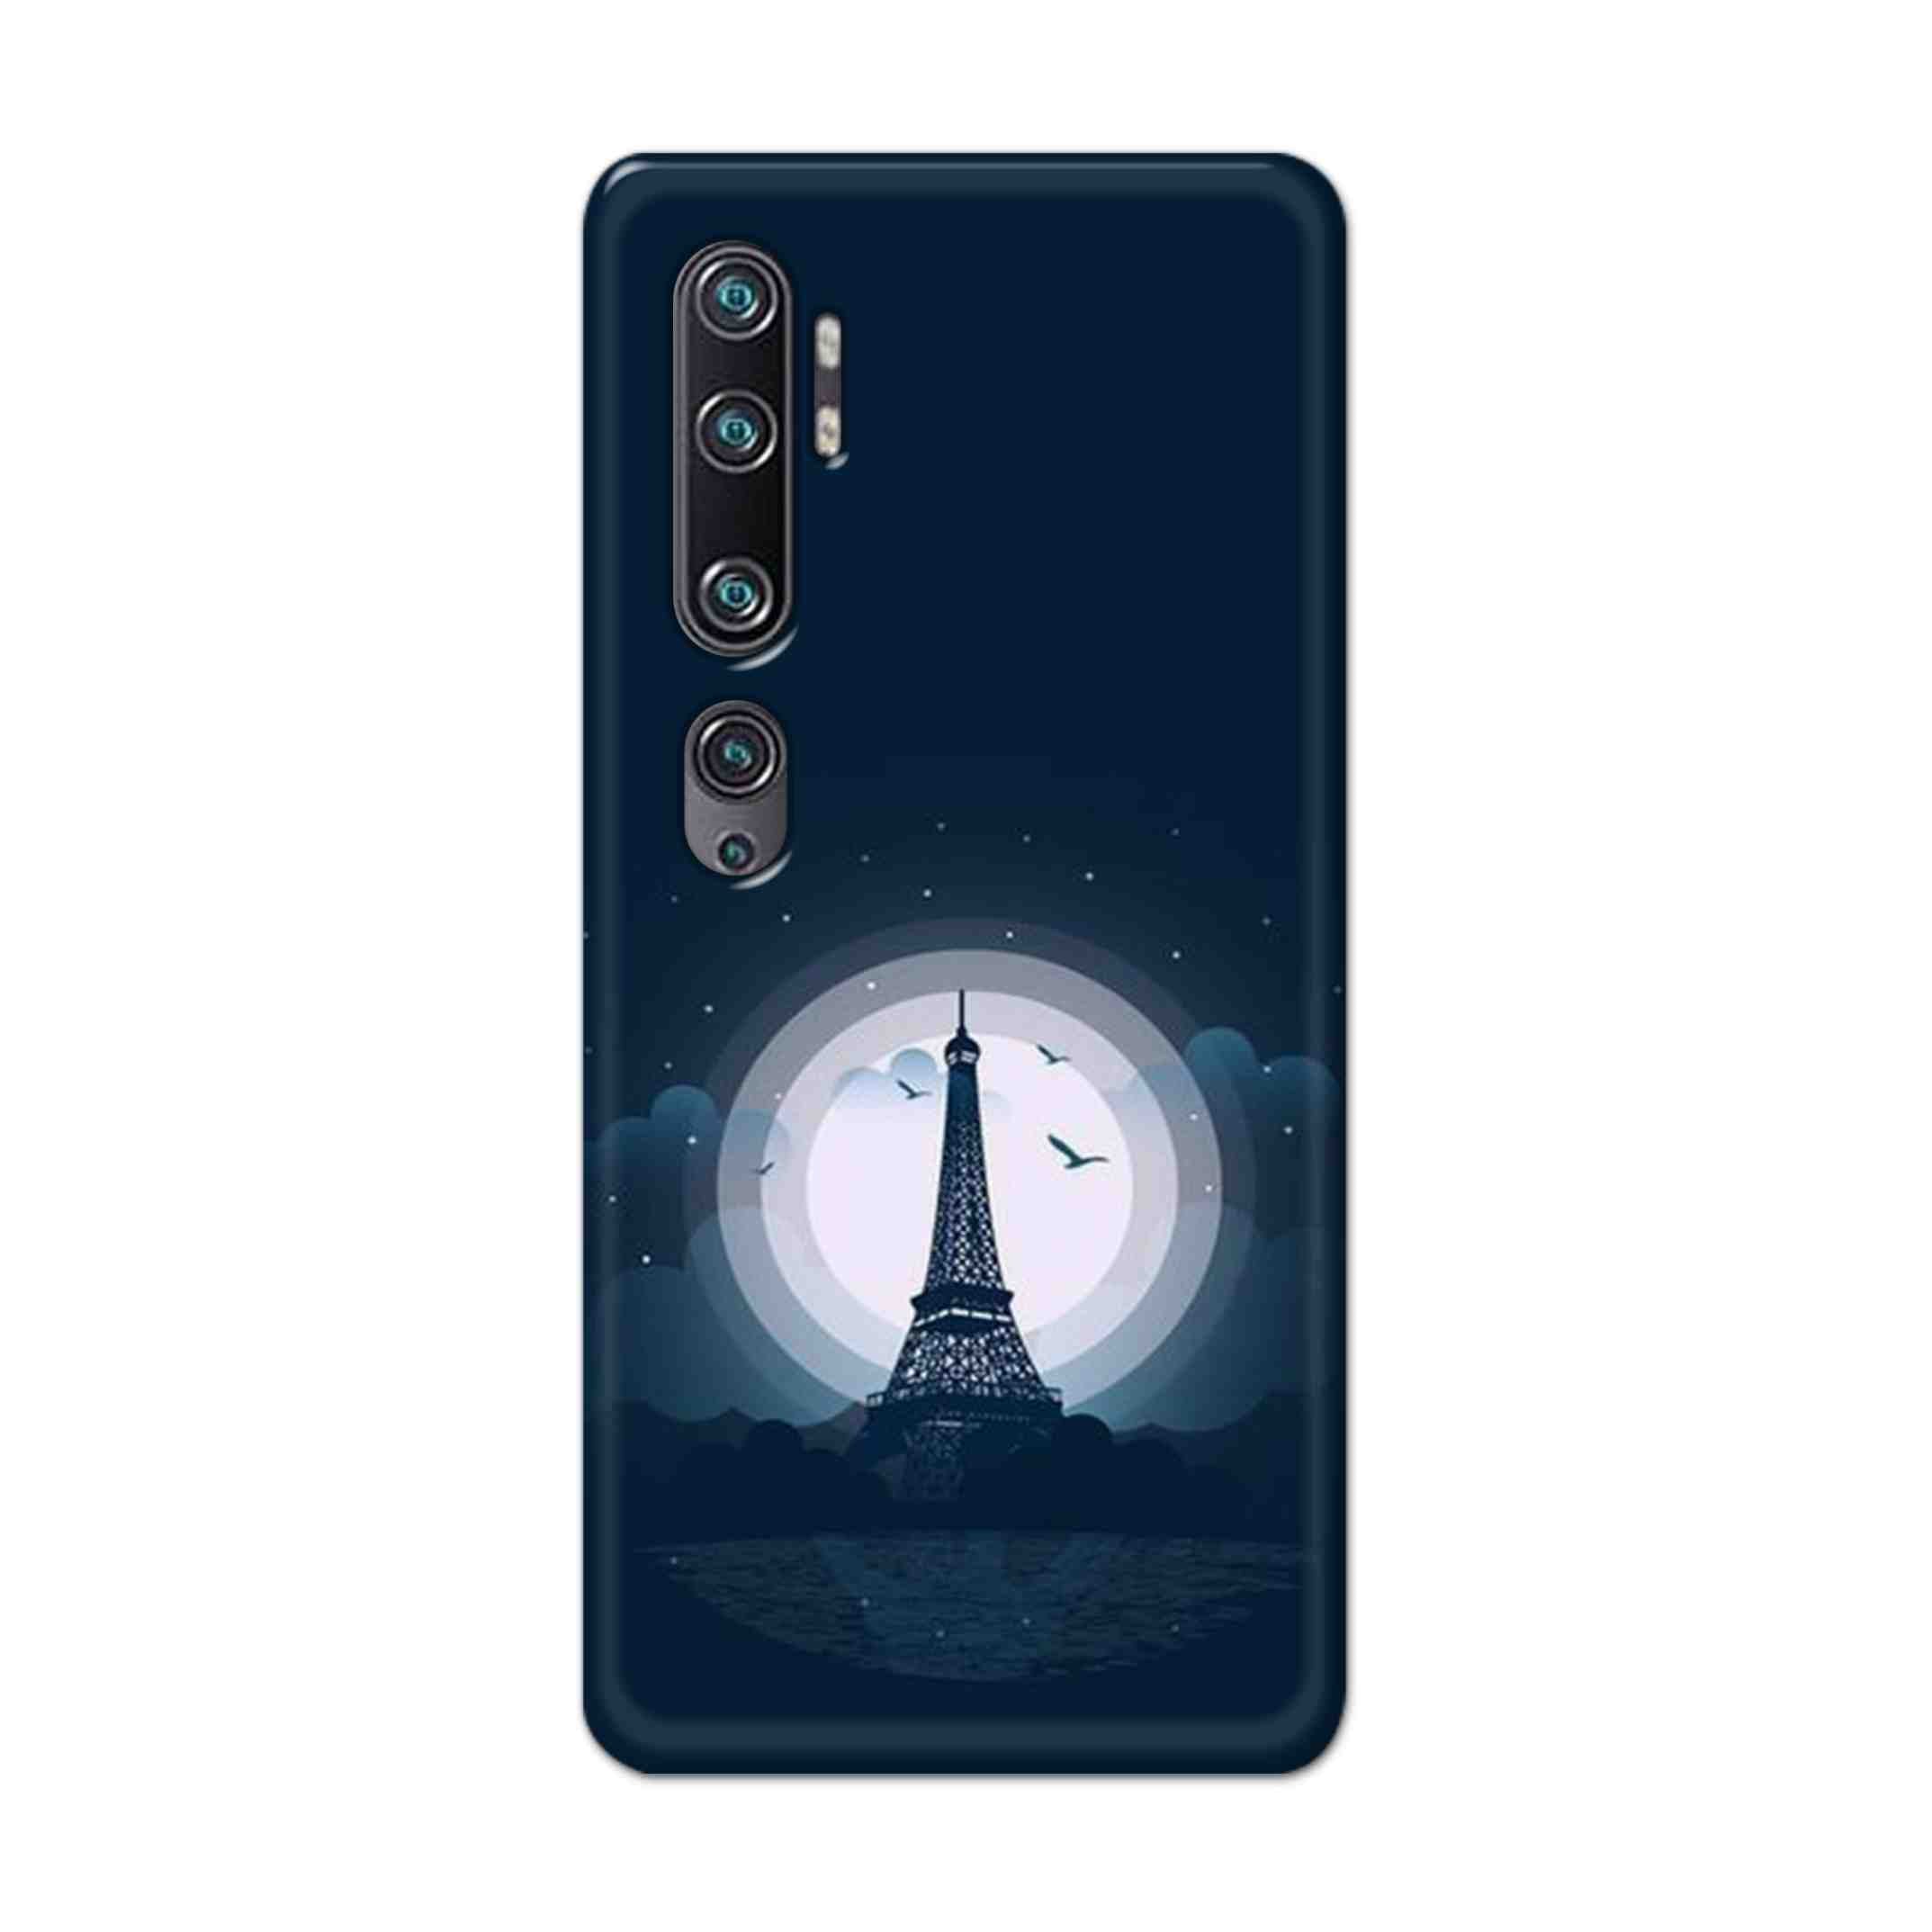 Buy Paris Eiffel Tower Hard Back Mobile Phone Case Cover For Xiaomi Mi Note 10 Online